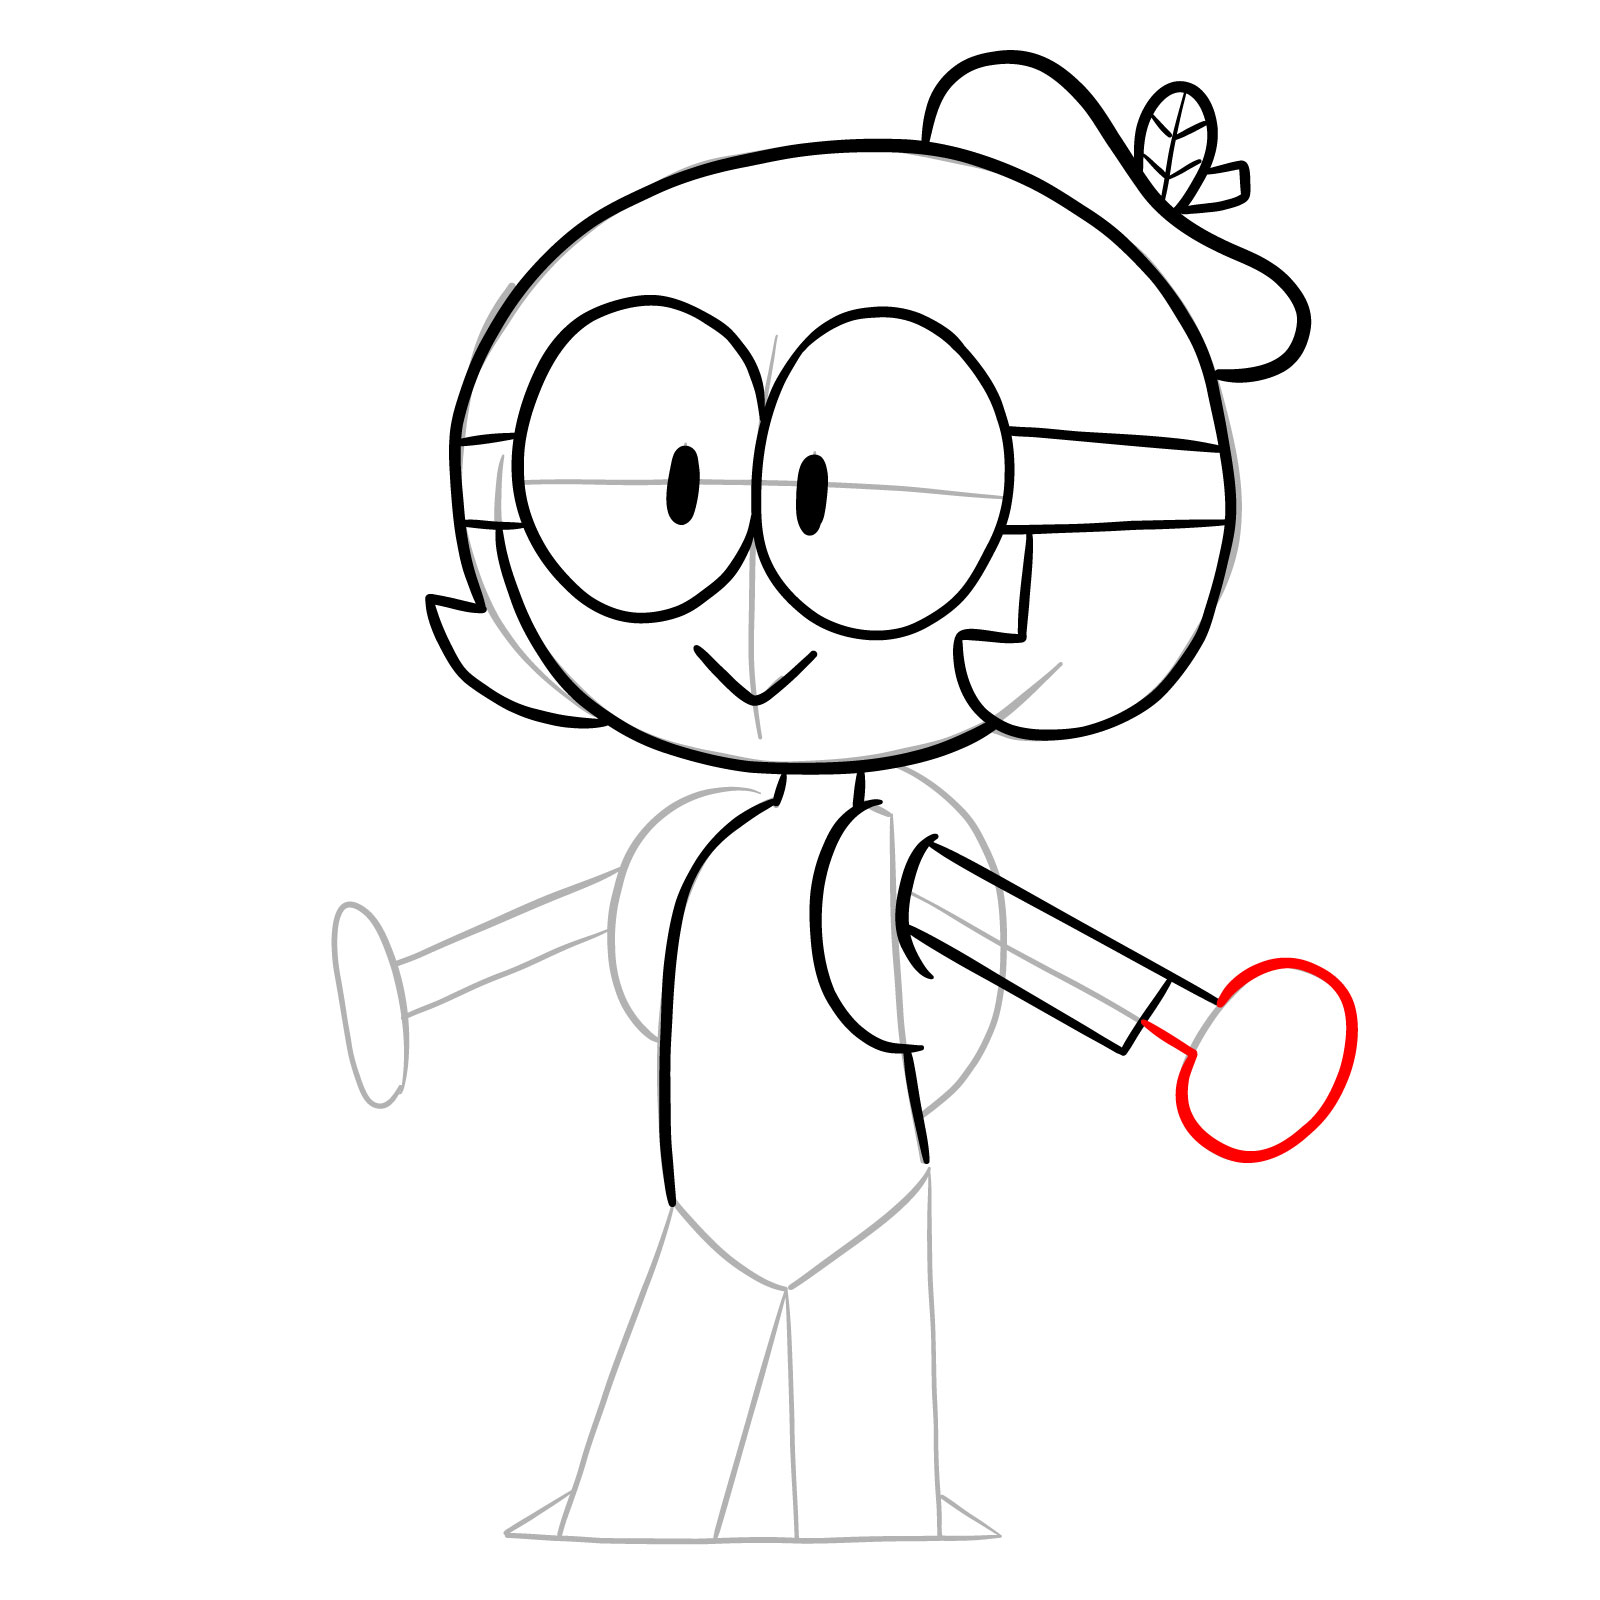 How to draw Dendy from OK K.O.! - step 14